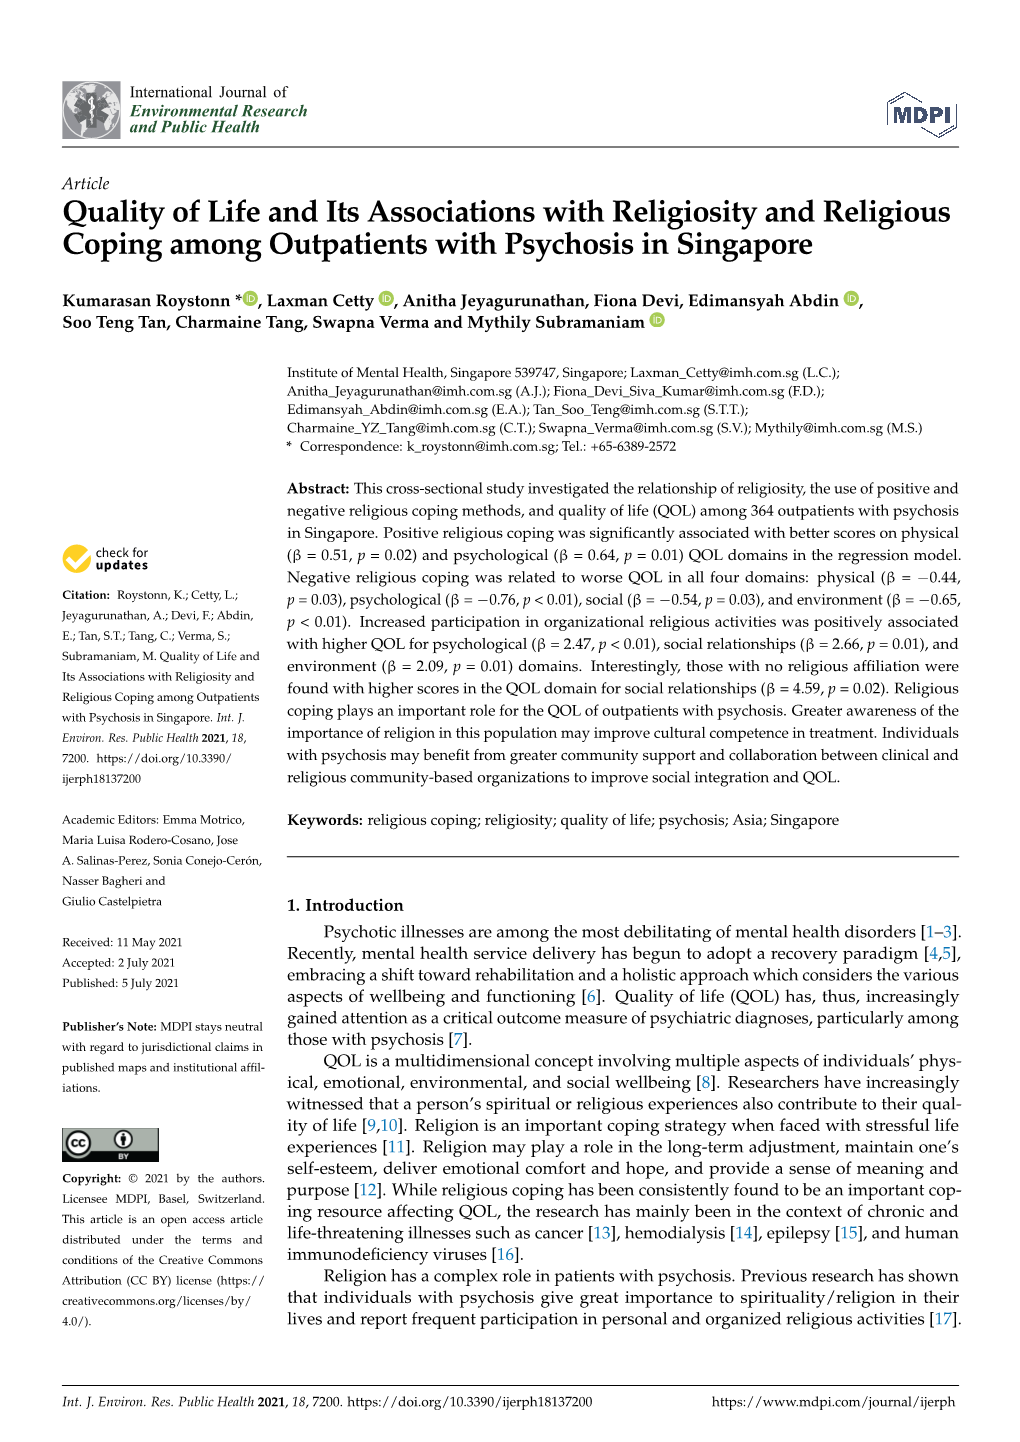 Quality of Life and Its Associations with Religiosity and Religious Coping Among Outpatients with Psychosis in Singapore